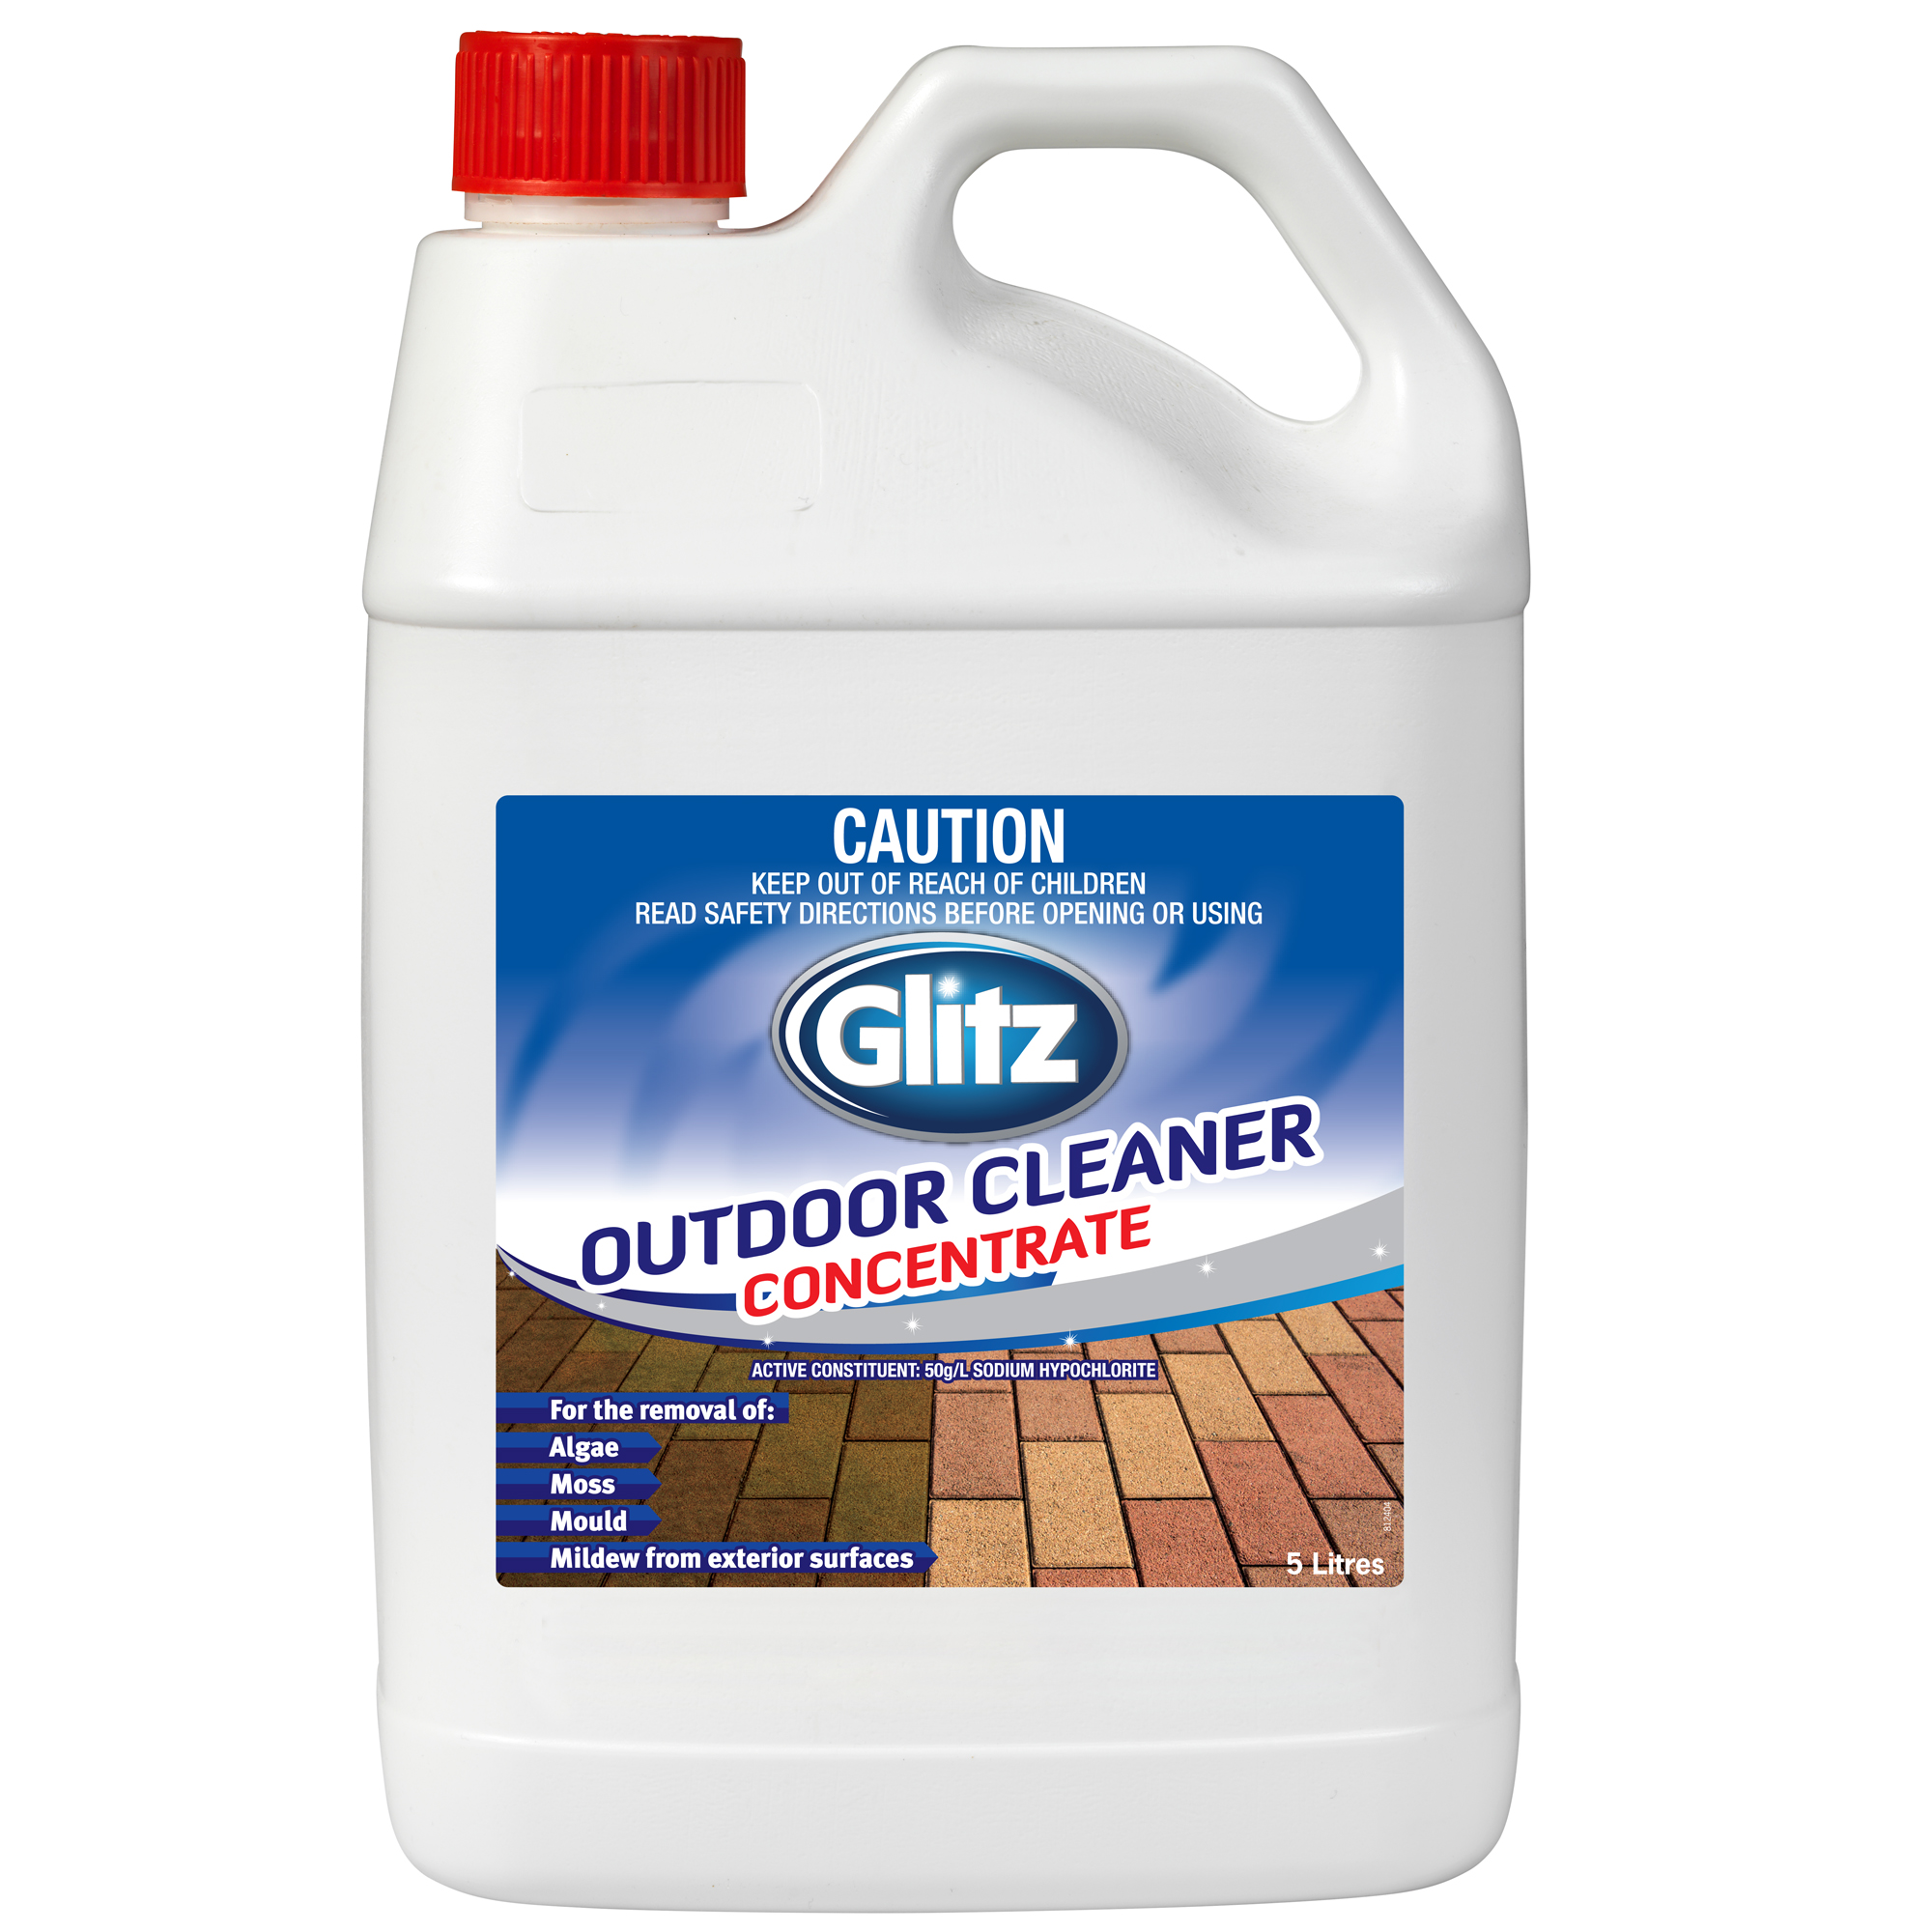 Glitz Outdoor Cleaner Concentrate 5L